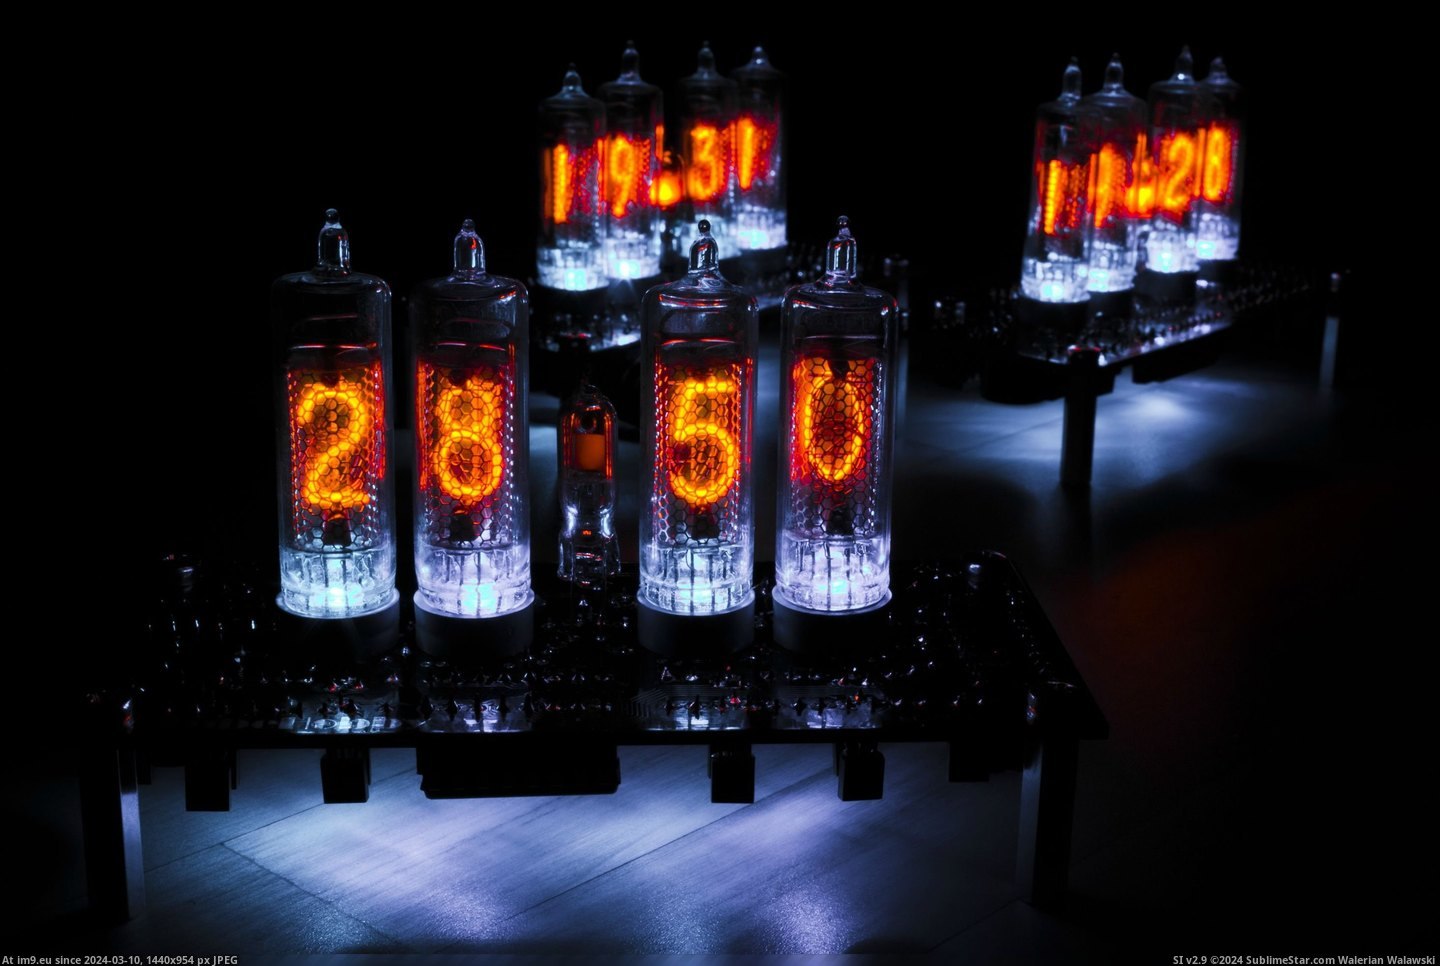 #Built #Project #Nixie #Coolest #Electronics #Possibly #Tube #Clock [Pics] Just built a Nixie Tube clock. Quite possibly the coolest electronics project I've done to date. Pic. (Image of album My r/PICS favs))